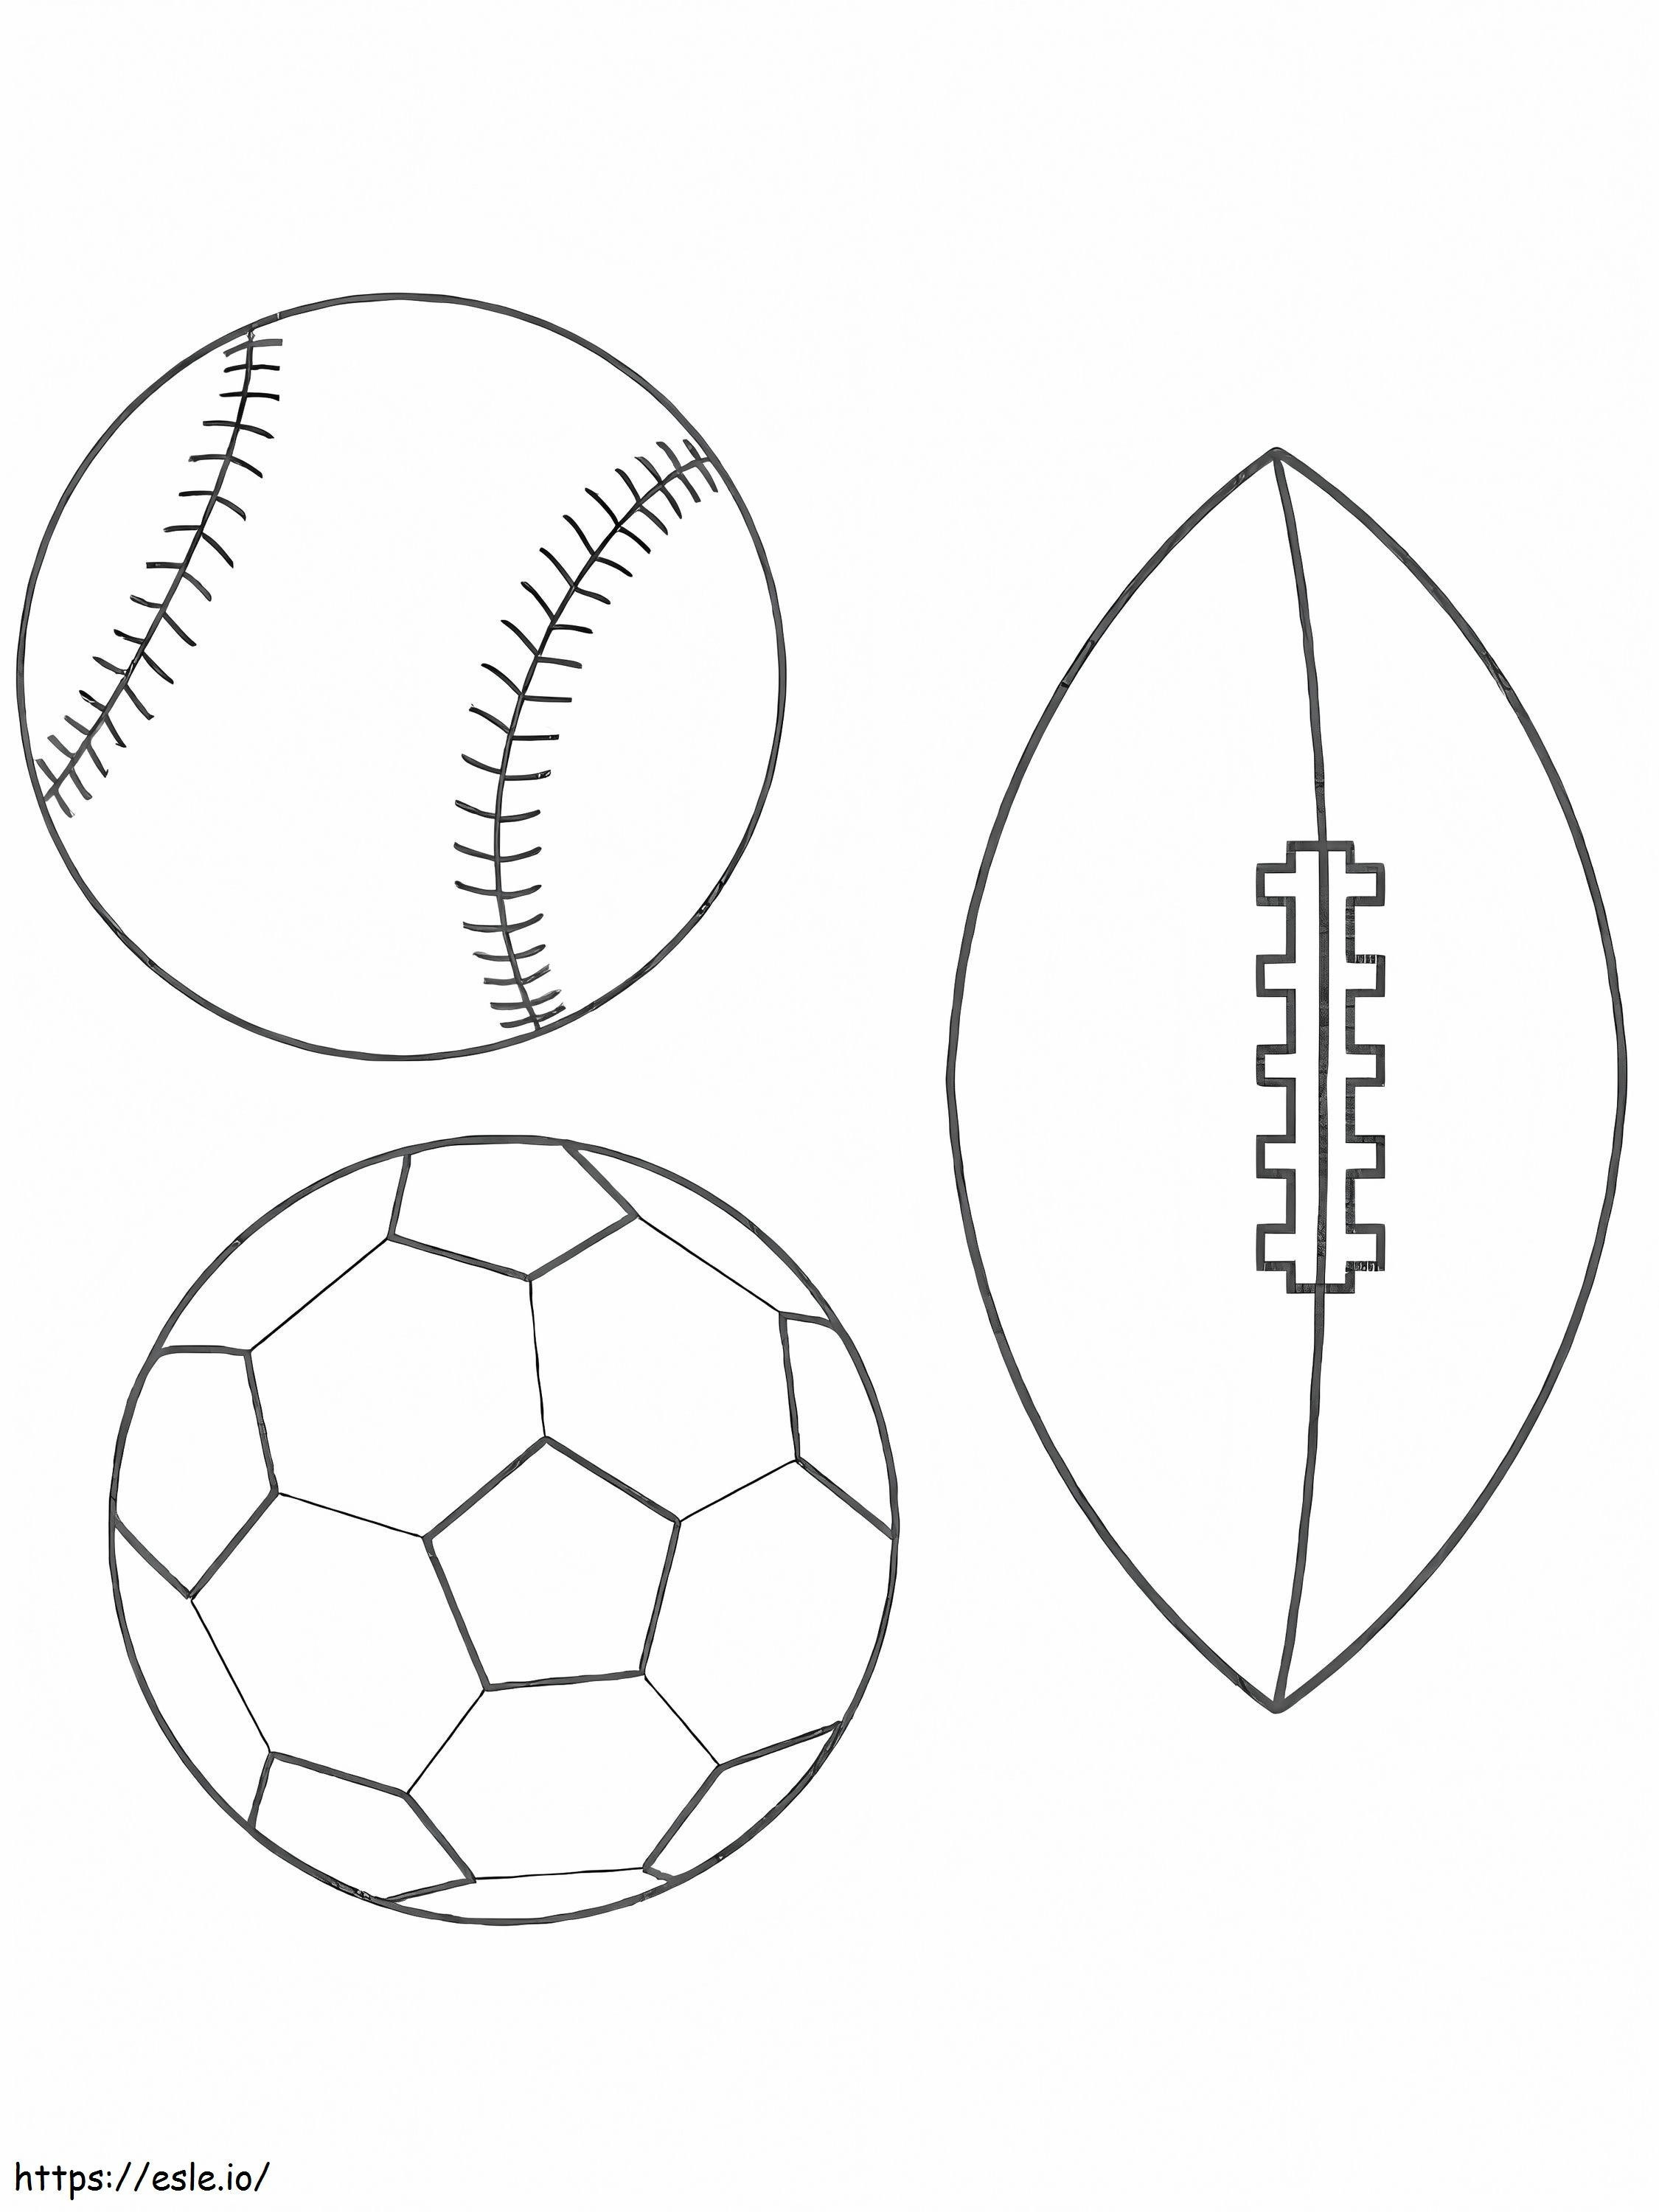 Sports Balls coloring page